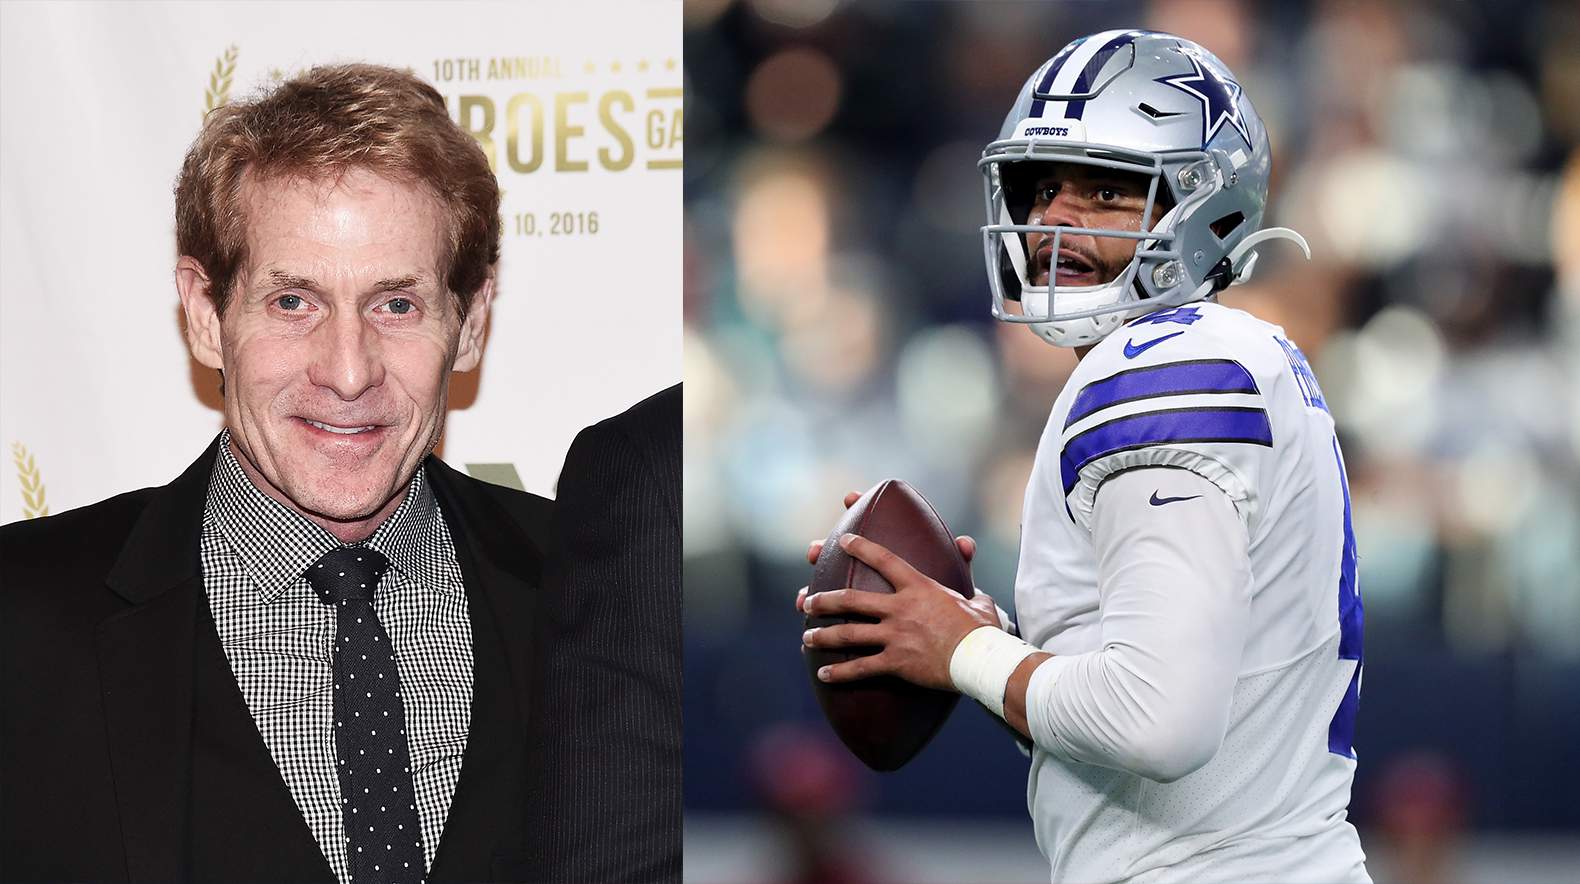 ‘Misconstrued’: Skip Bayless responds to backlash over comments about Dak Prescott’s battle with depression